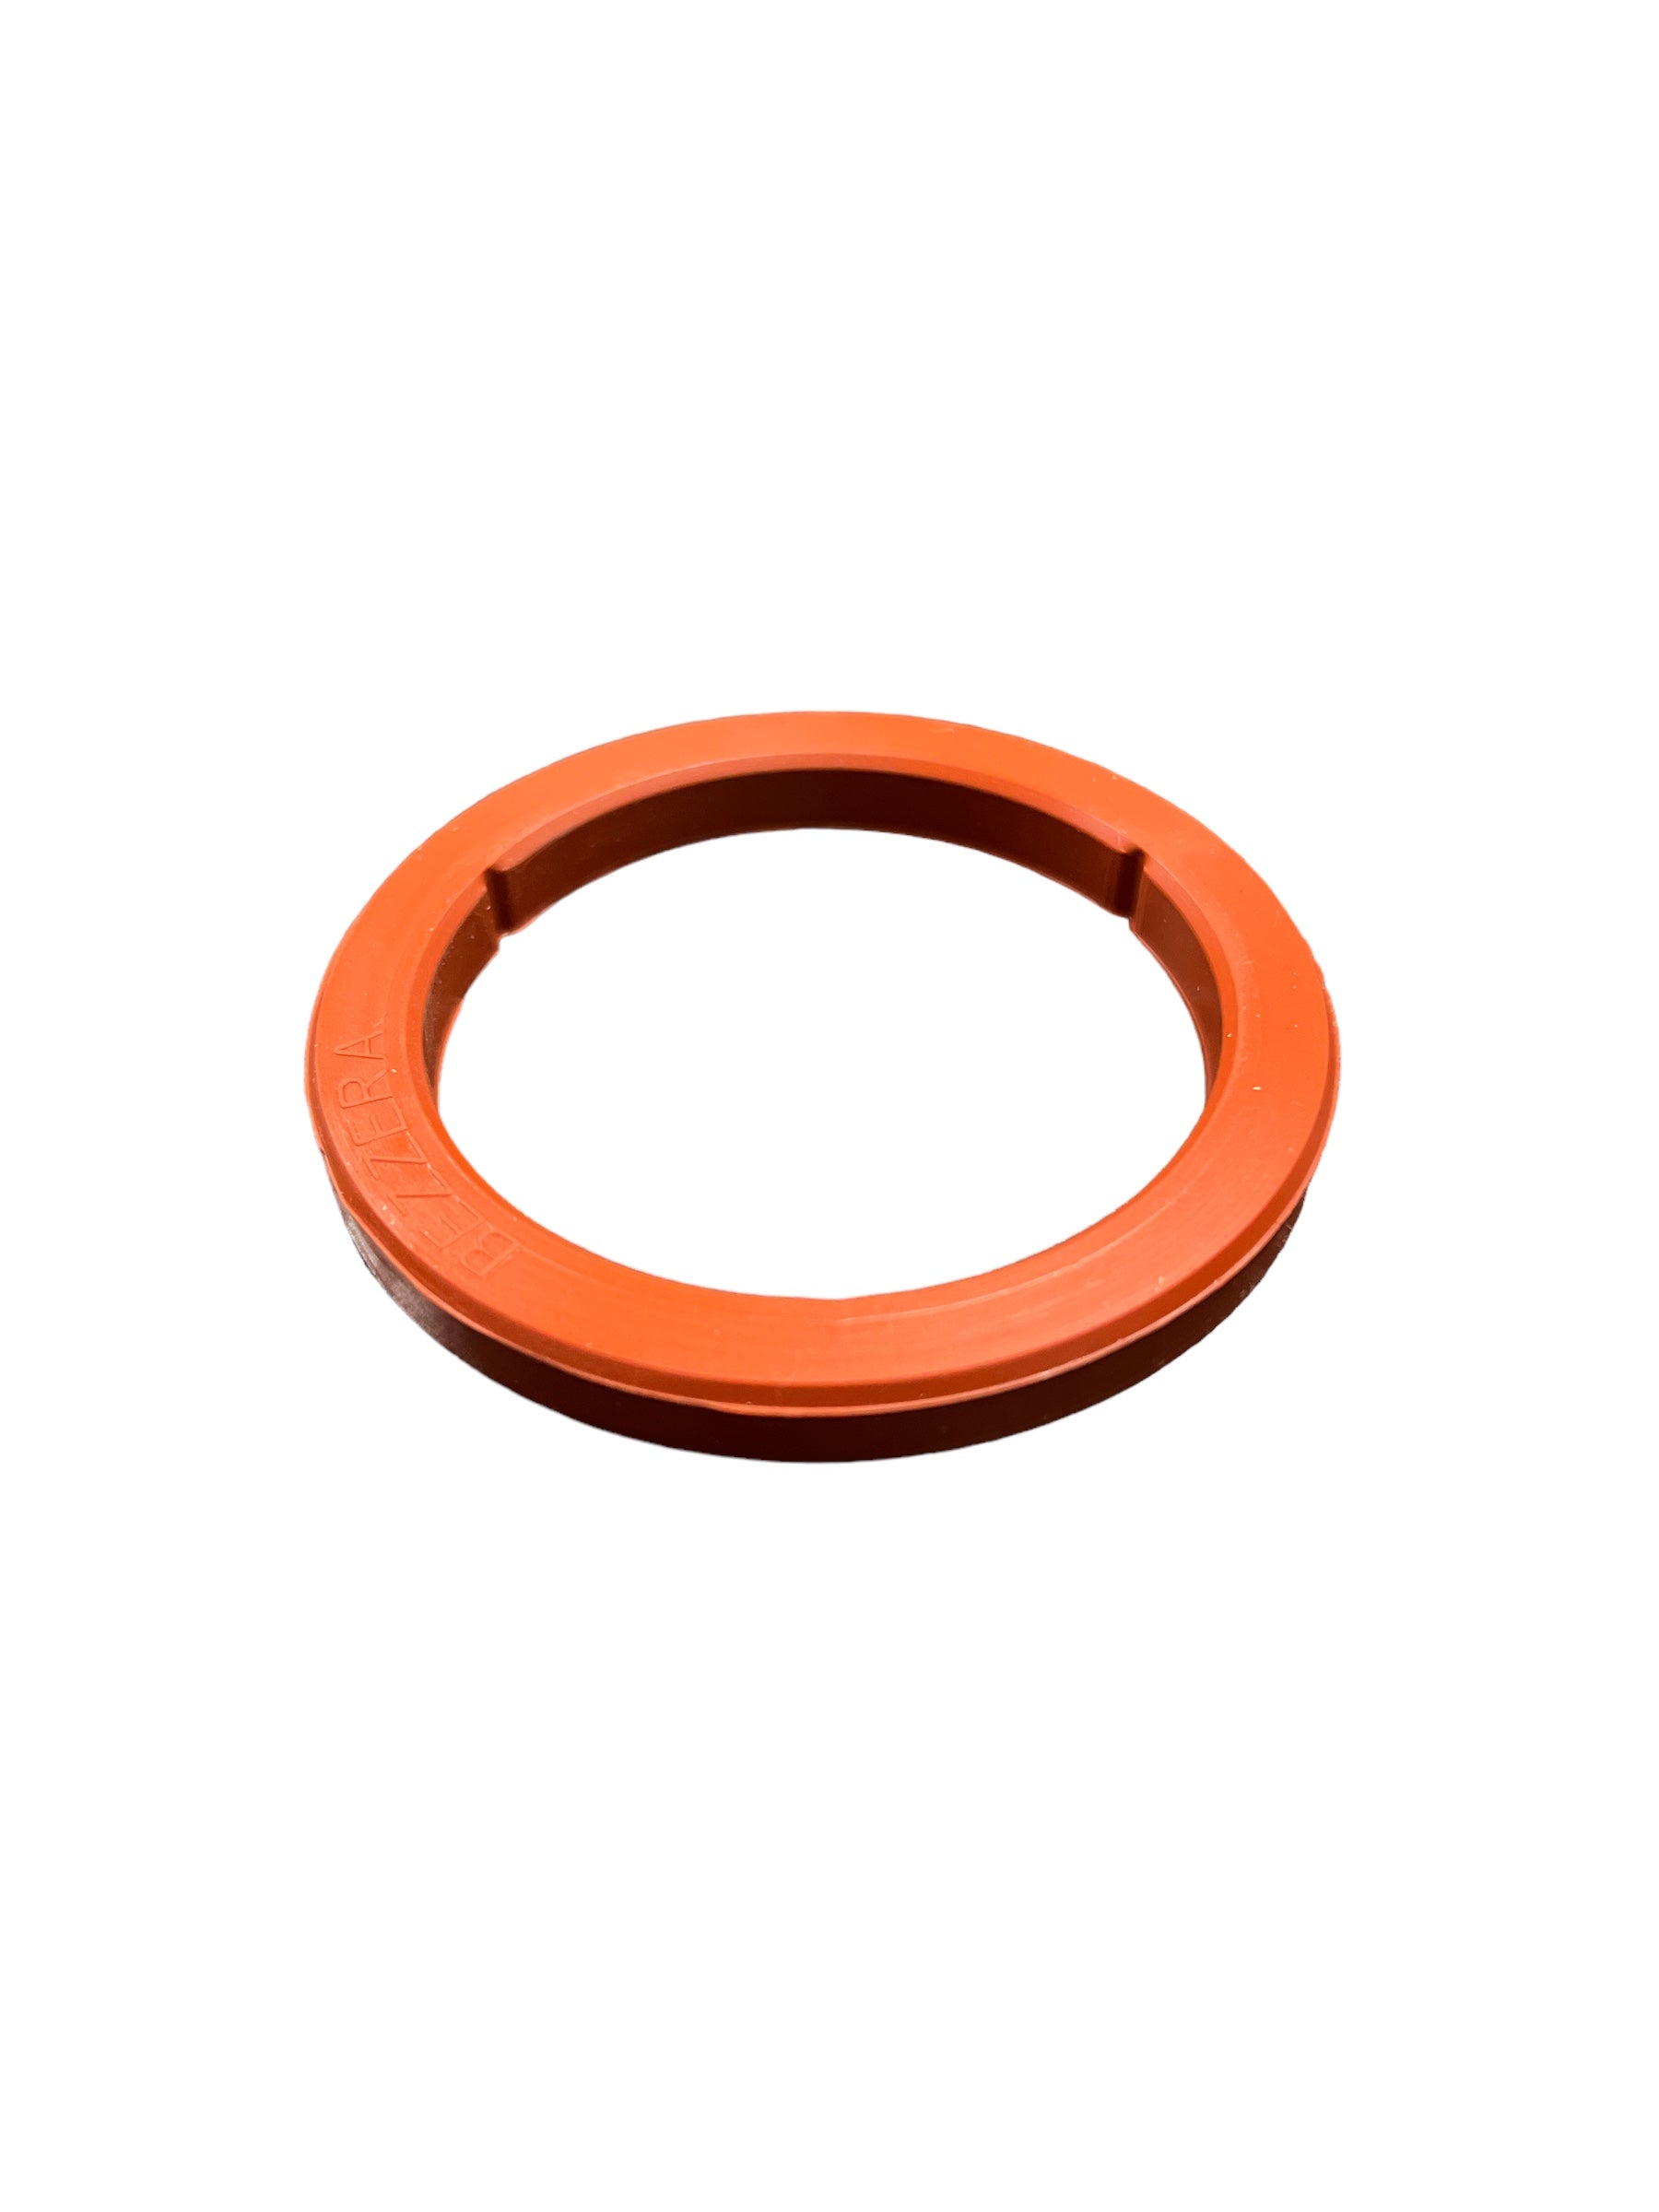 RBEZ5236 - RED SILICONE GASKET FOR SEMI PROFESSIONAL MACHINES BZ GROUP